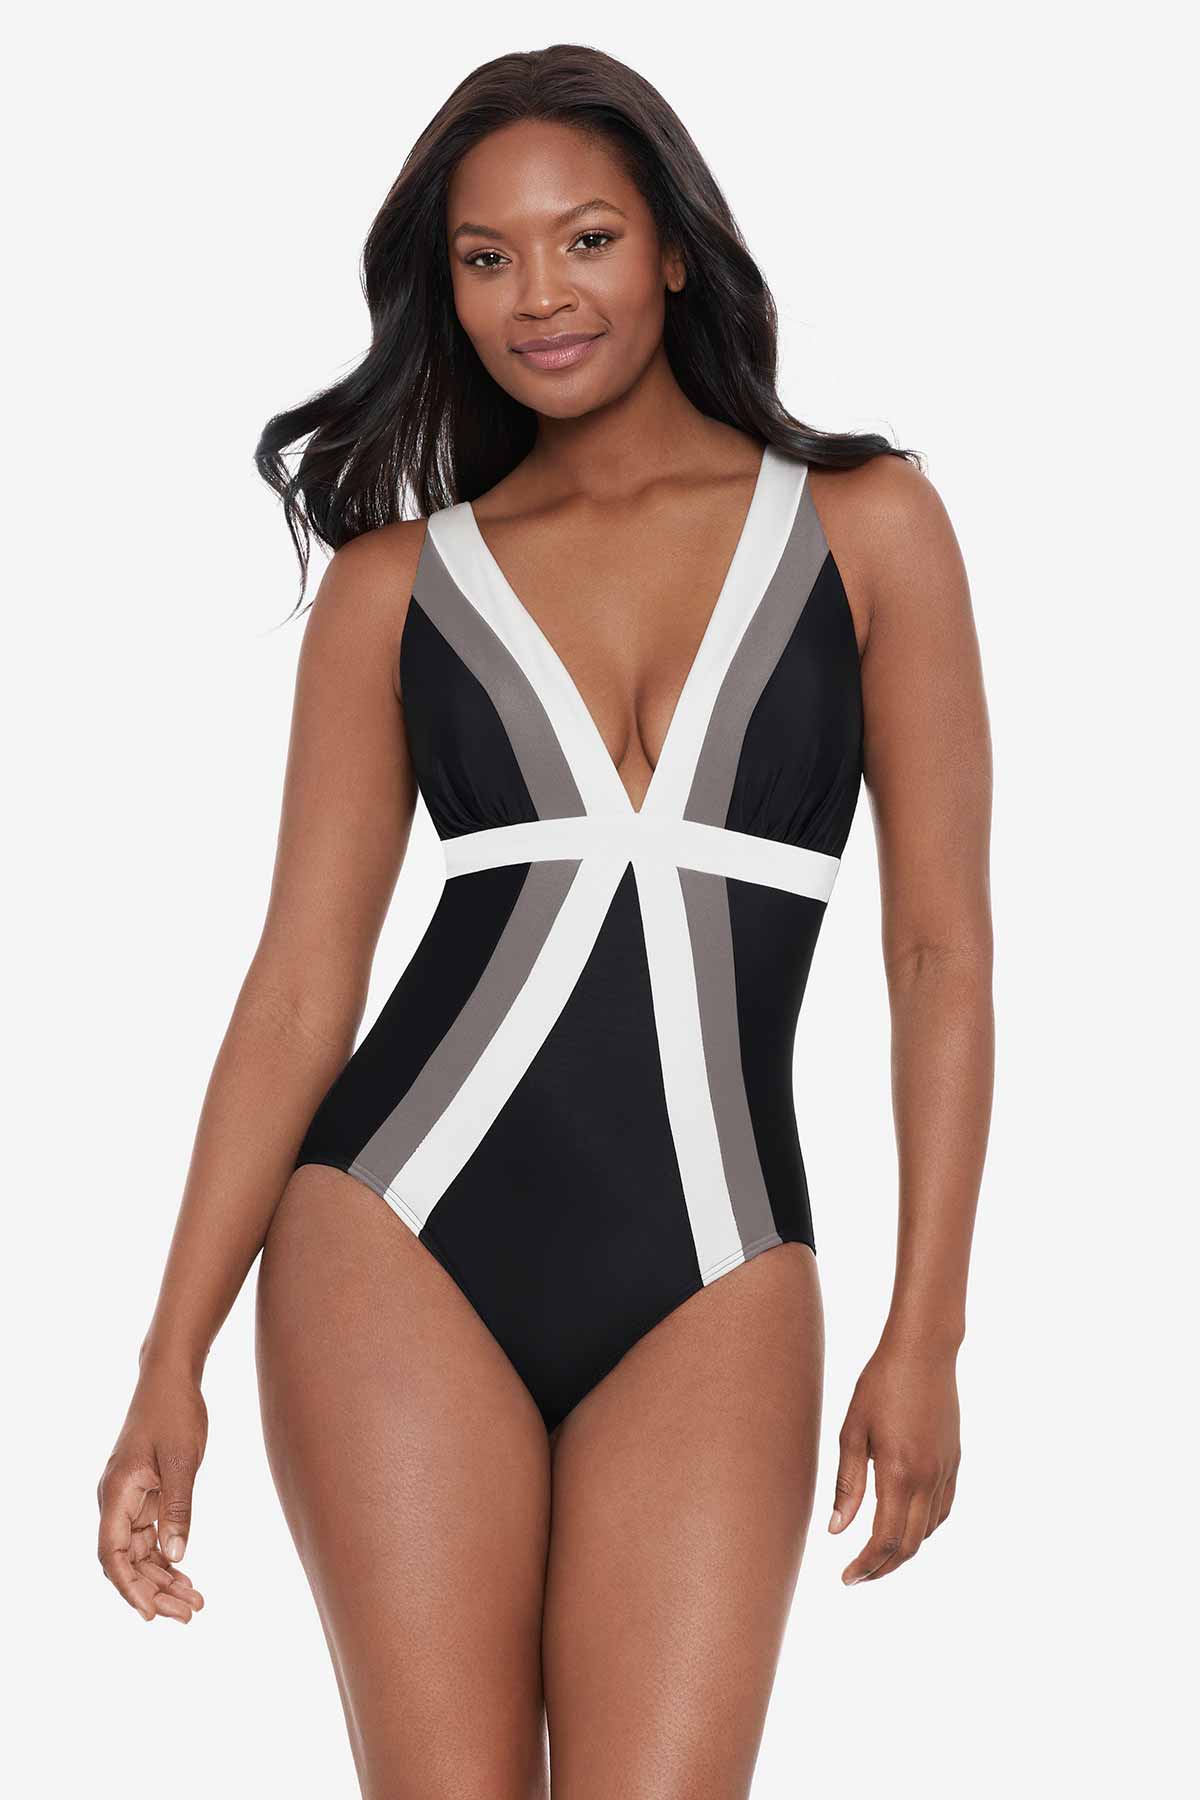 Dreamsuit by Miracle Brands Multi Color Black One Piece Swimsuit